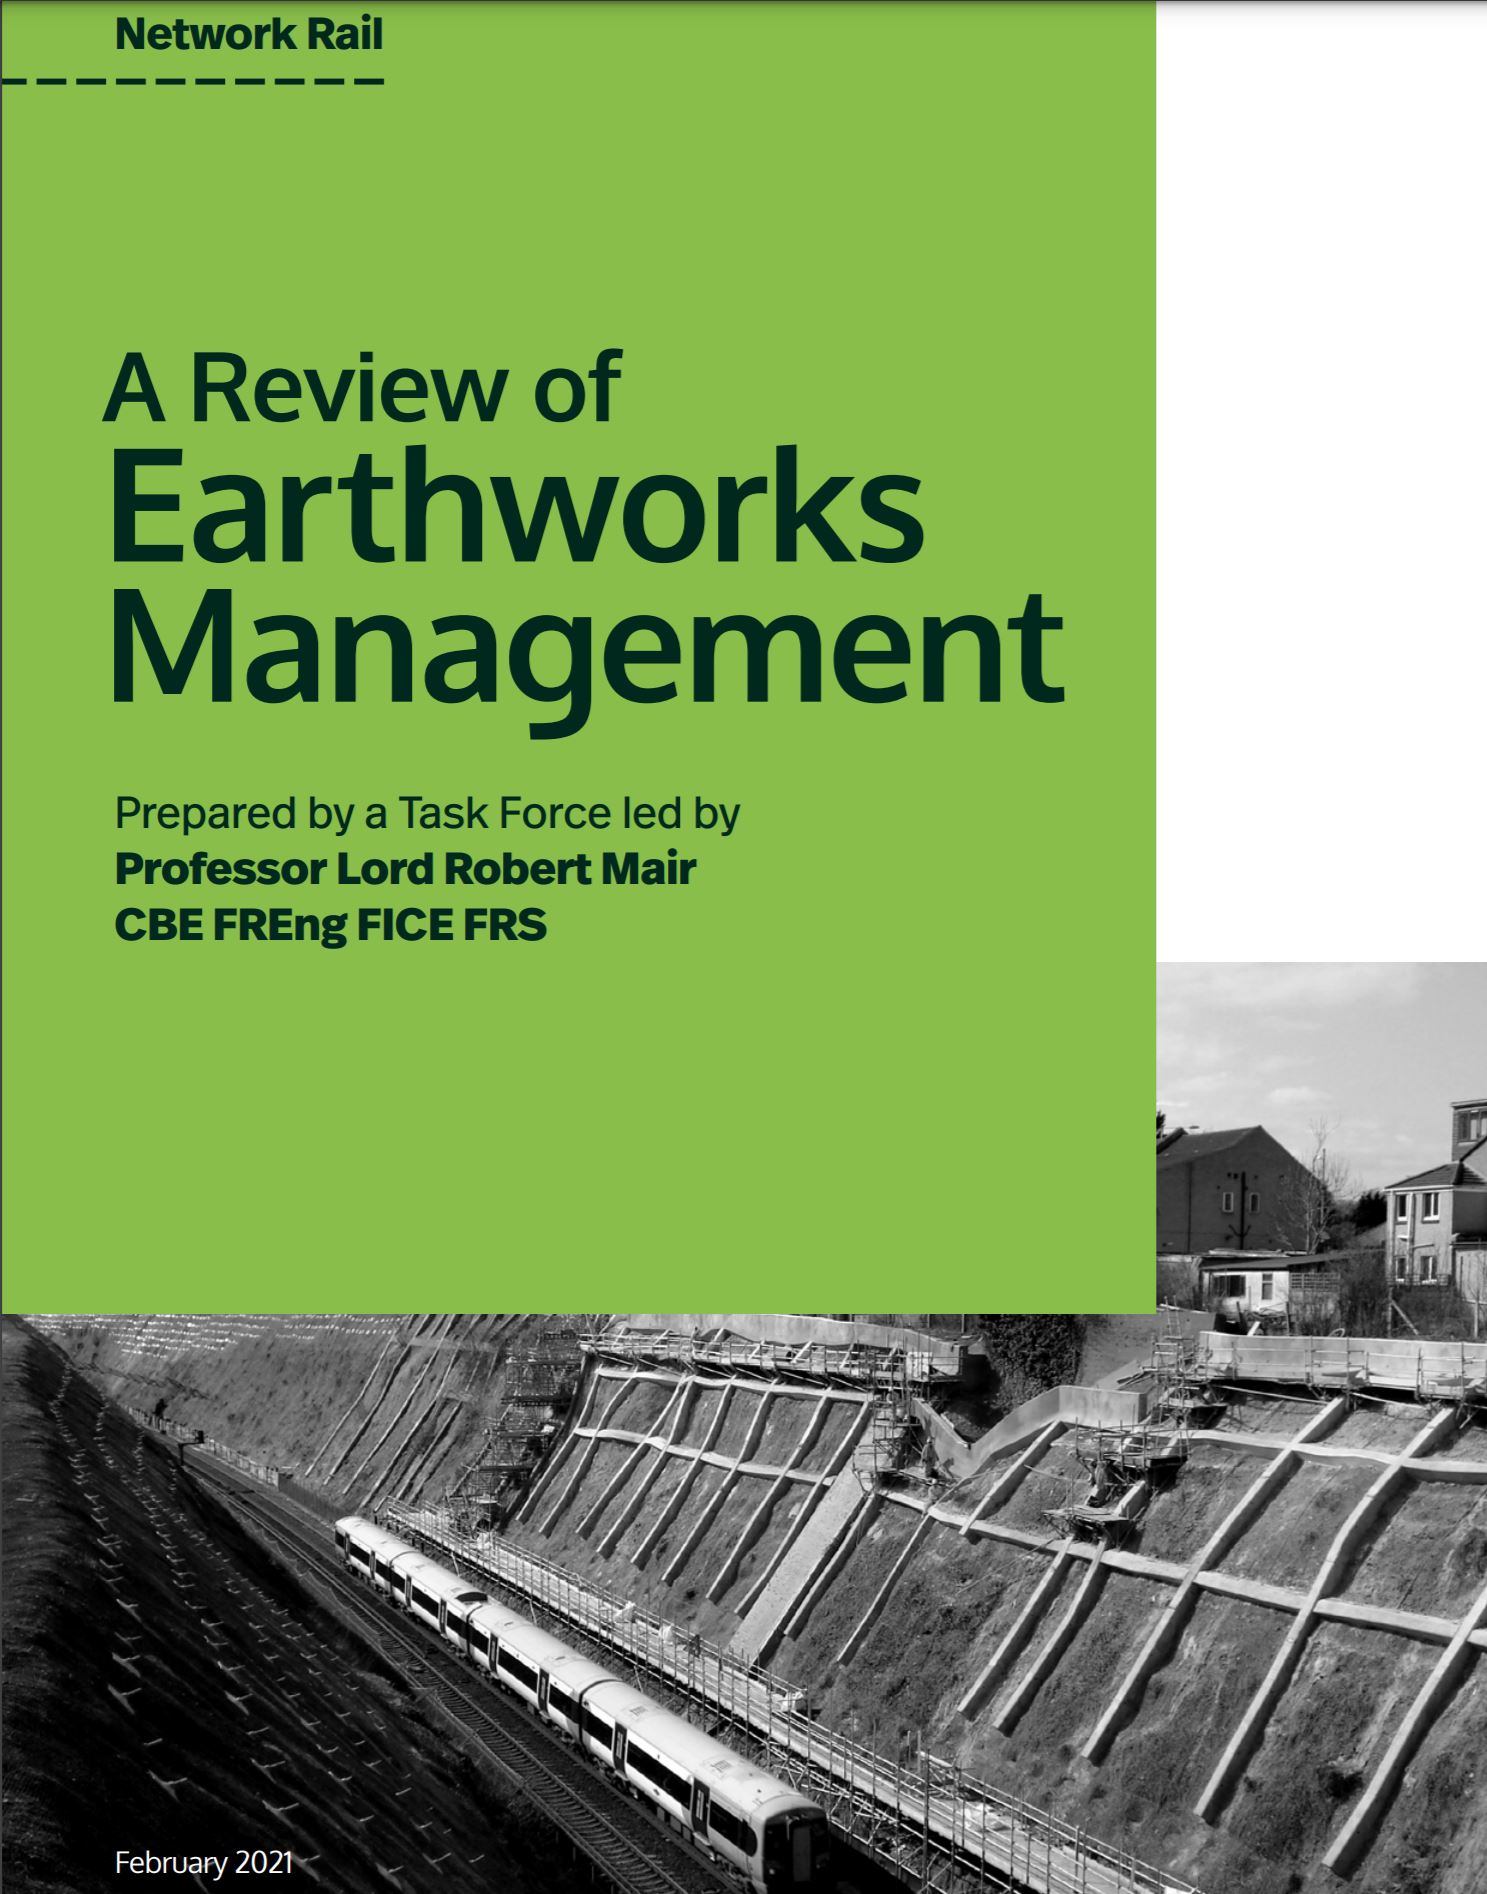 The front cover of the Network Rail report on Earthworks Management